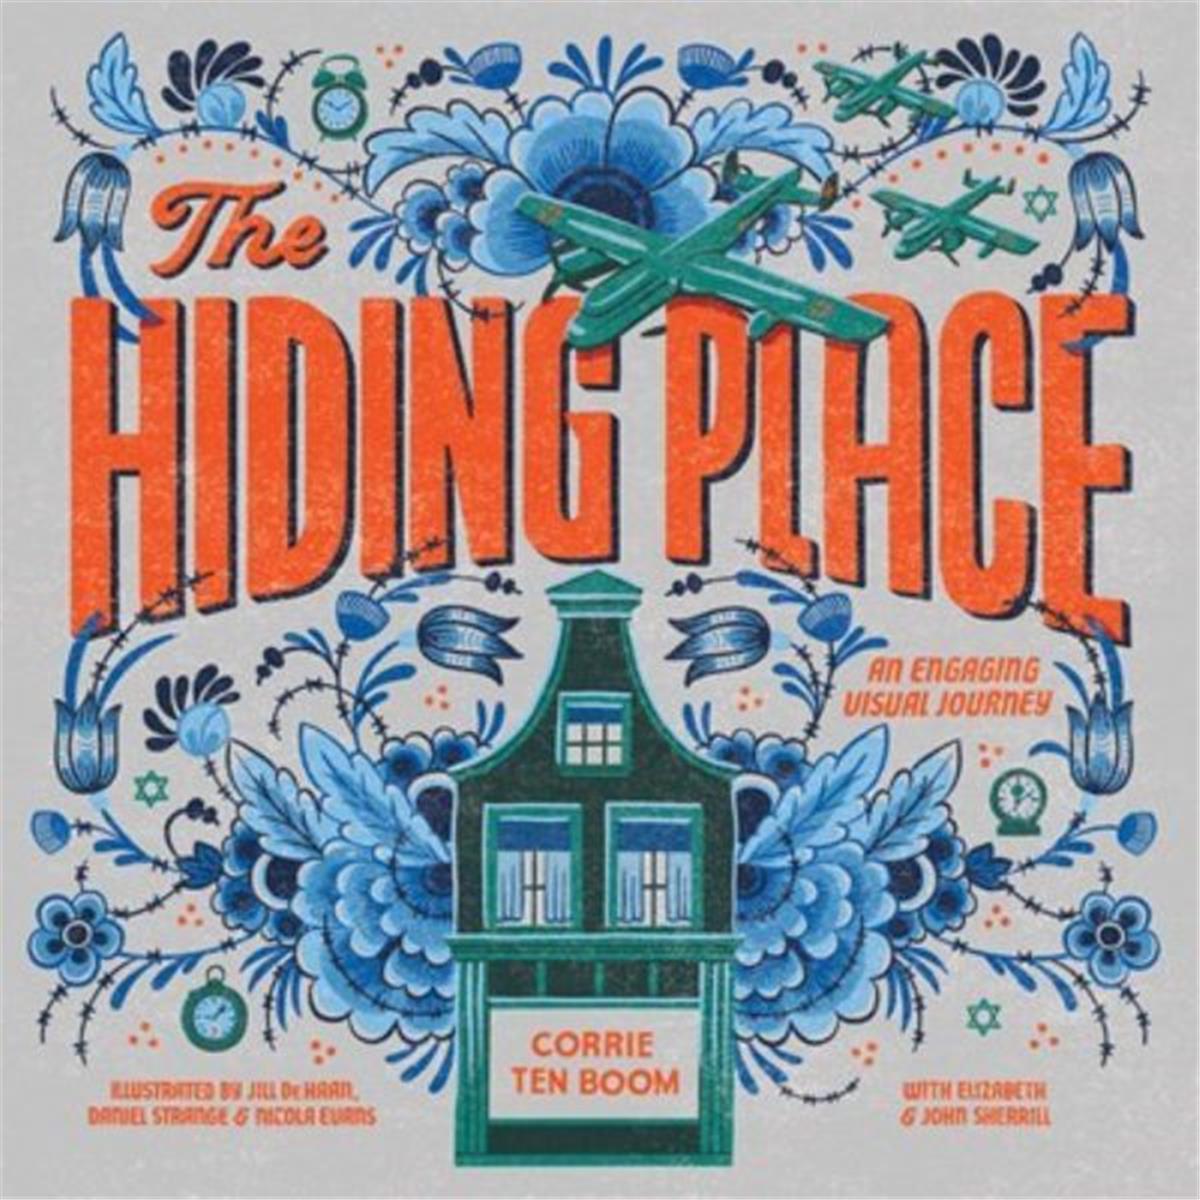 240373 The Hiding Place - An Engaging Visual Journey Book -  Tyndale House Publishers